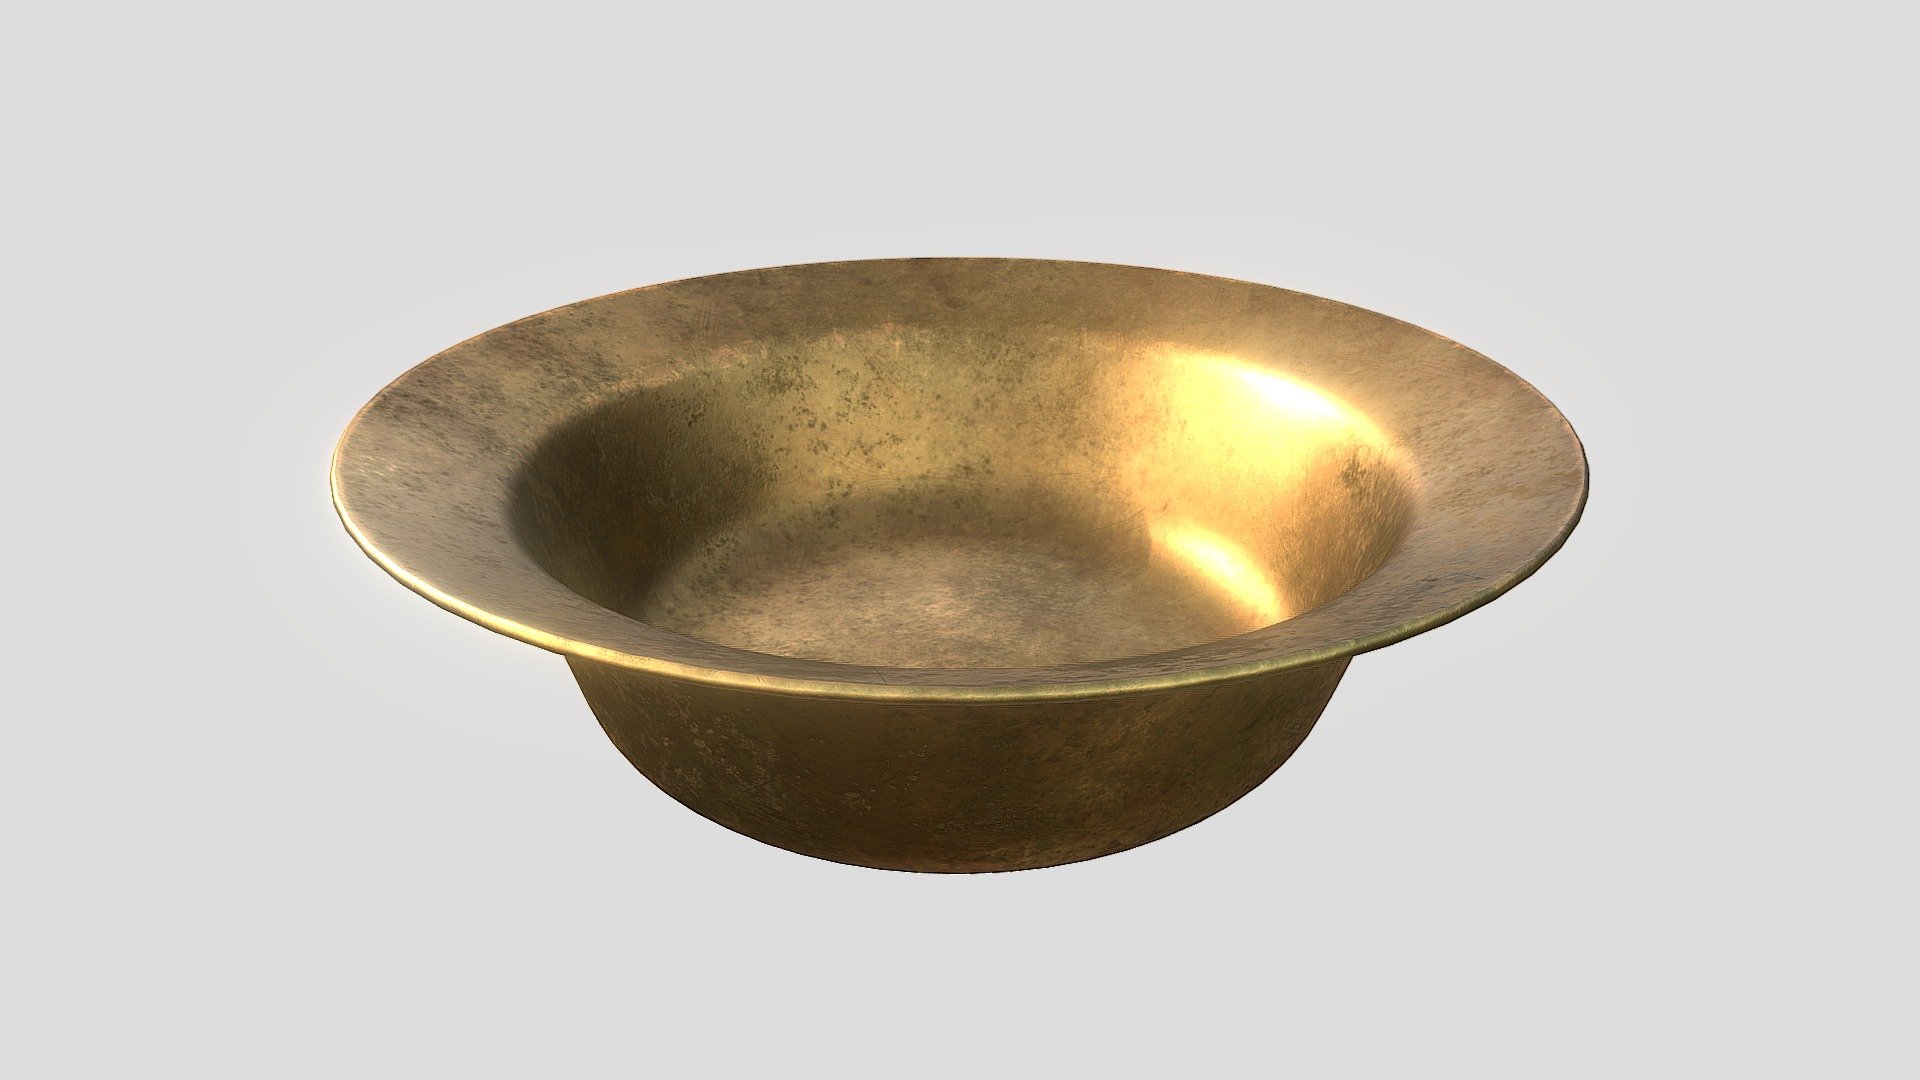 Ready to use brass bowl with oxidation, dirt and old marks. Made in blender, painted with Substance - Free Brass Bowl Old - Download Free 3D model by vrtim (@vruderkuss) 3d model